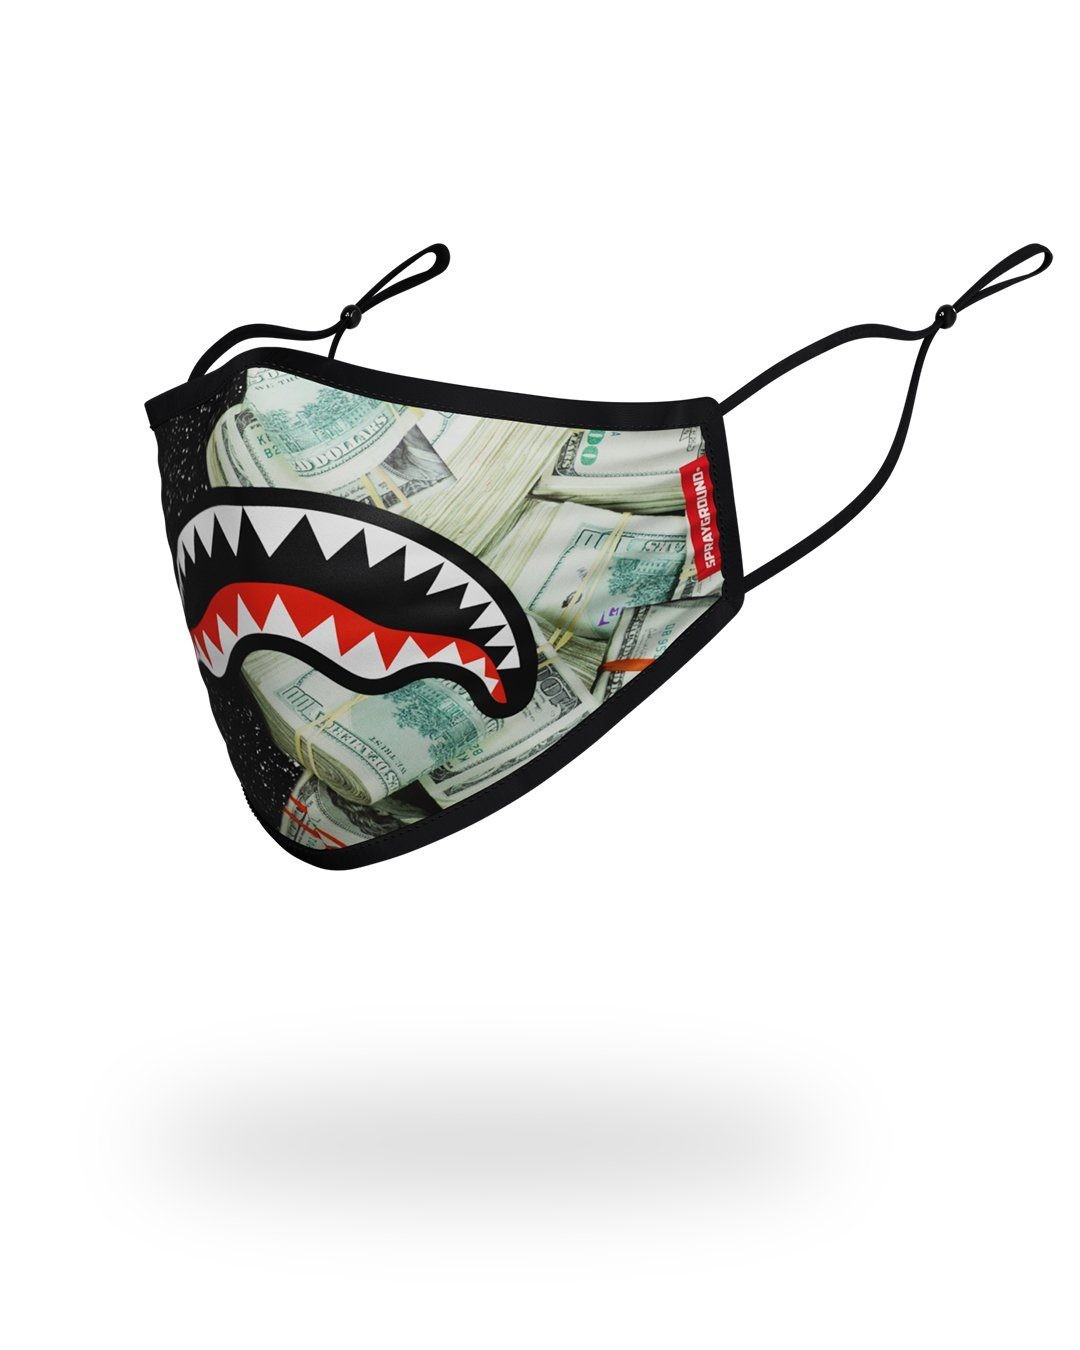 HOT SALE ☆☆☆ ADULT PARTY SHARK FORM FITTING FACE MASK - HOT SALE ☆☆☆ ADULT PARTY SHARK FORM FITTING FACE MASK-01-1